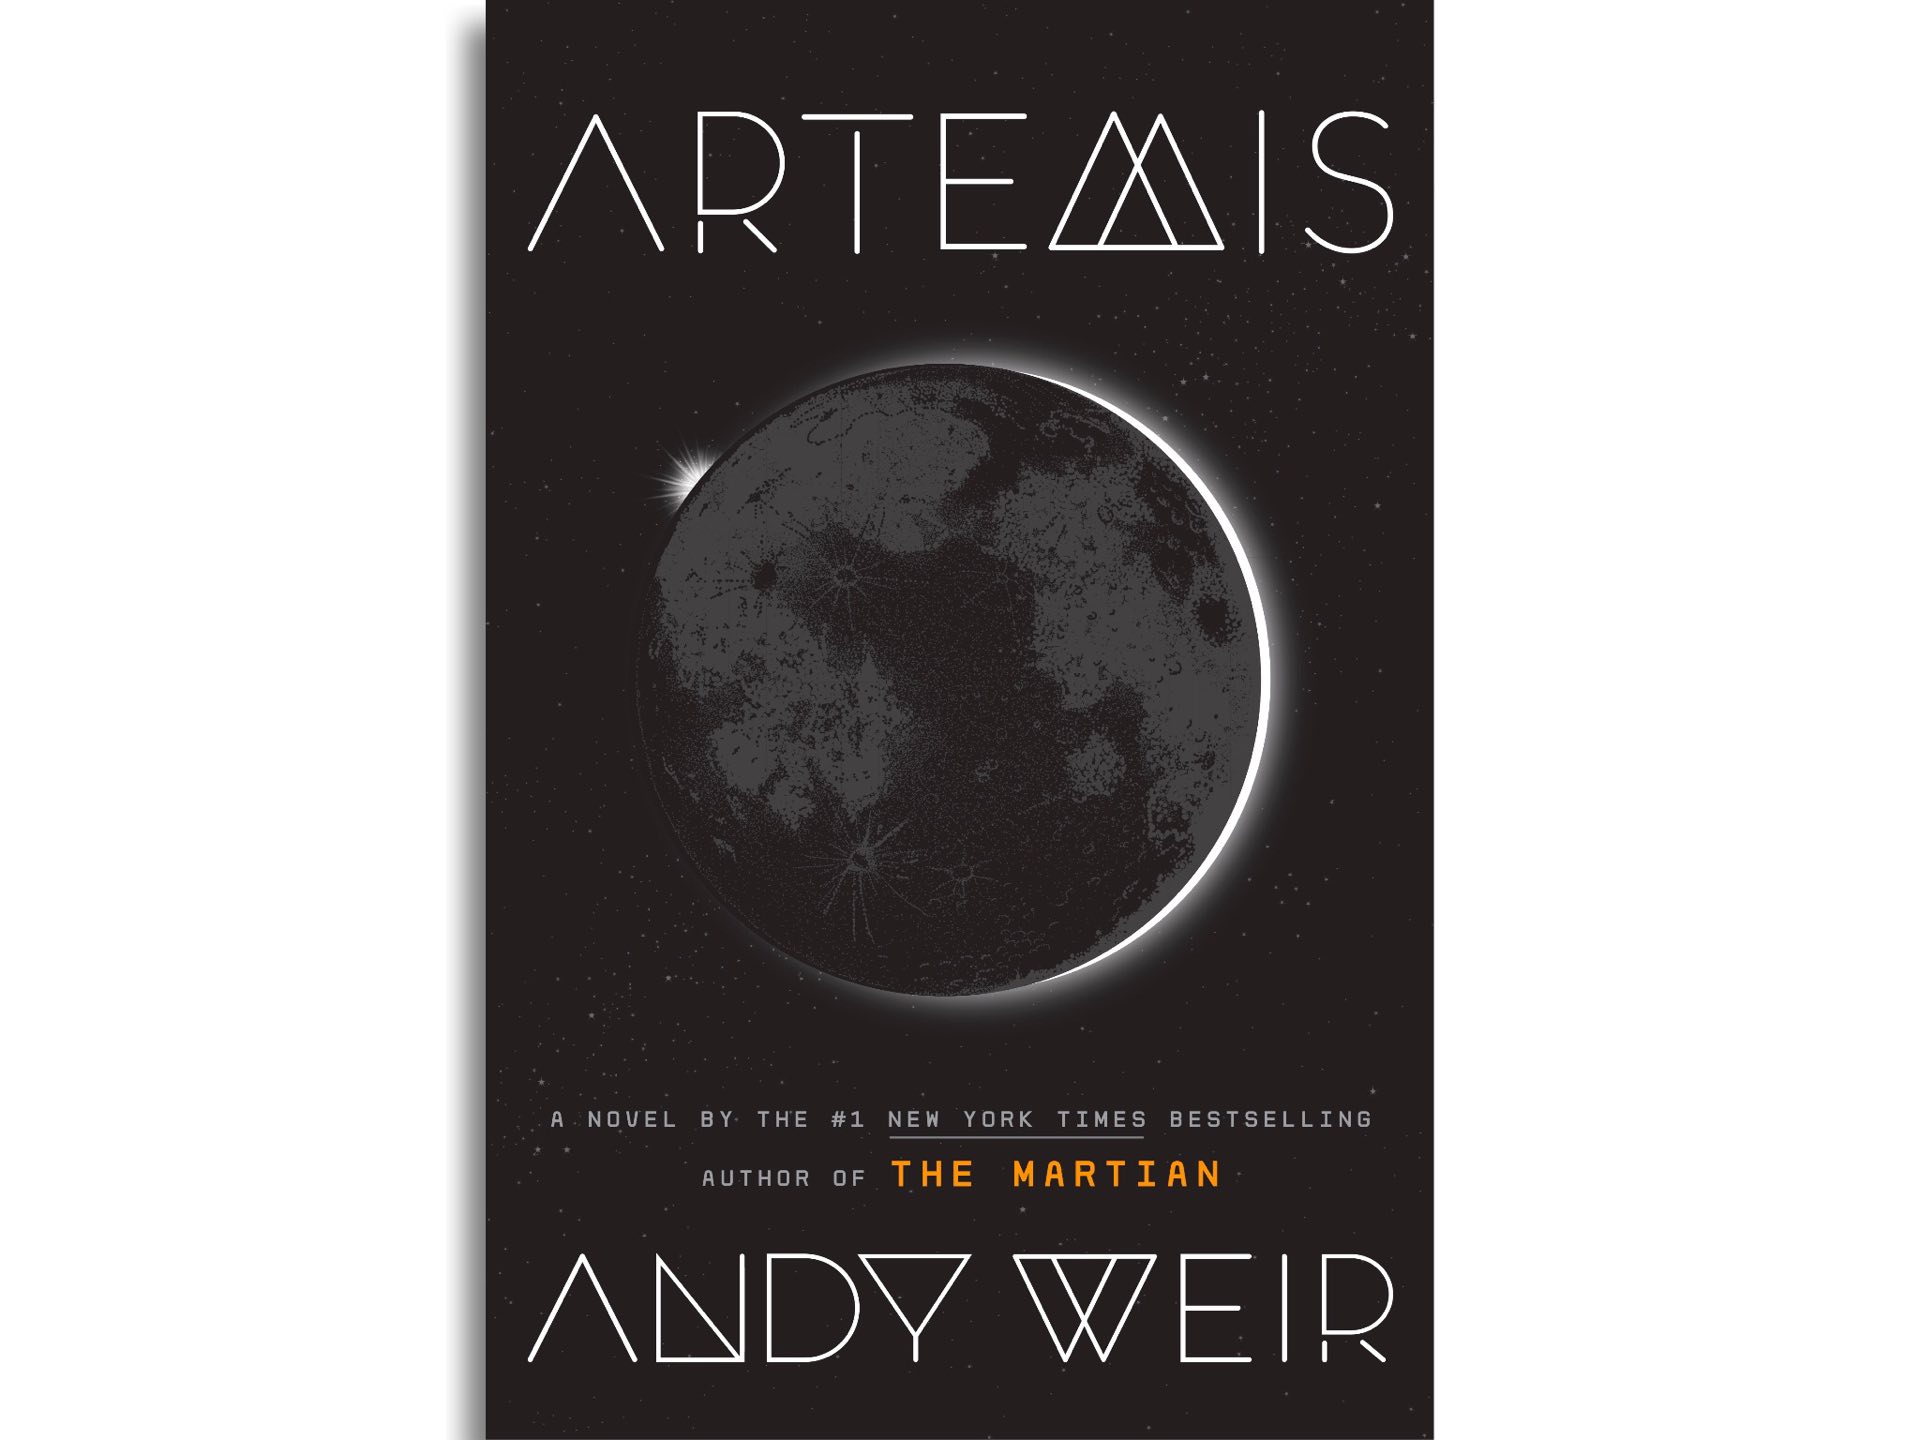 Artemis by Andy Weir. ($17 hardcover)